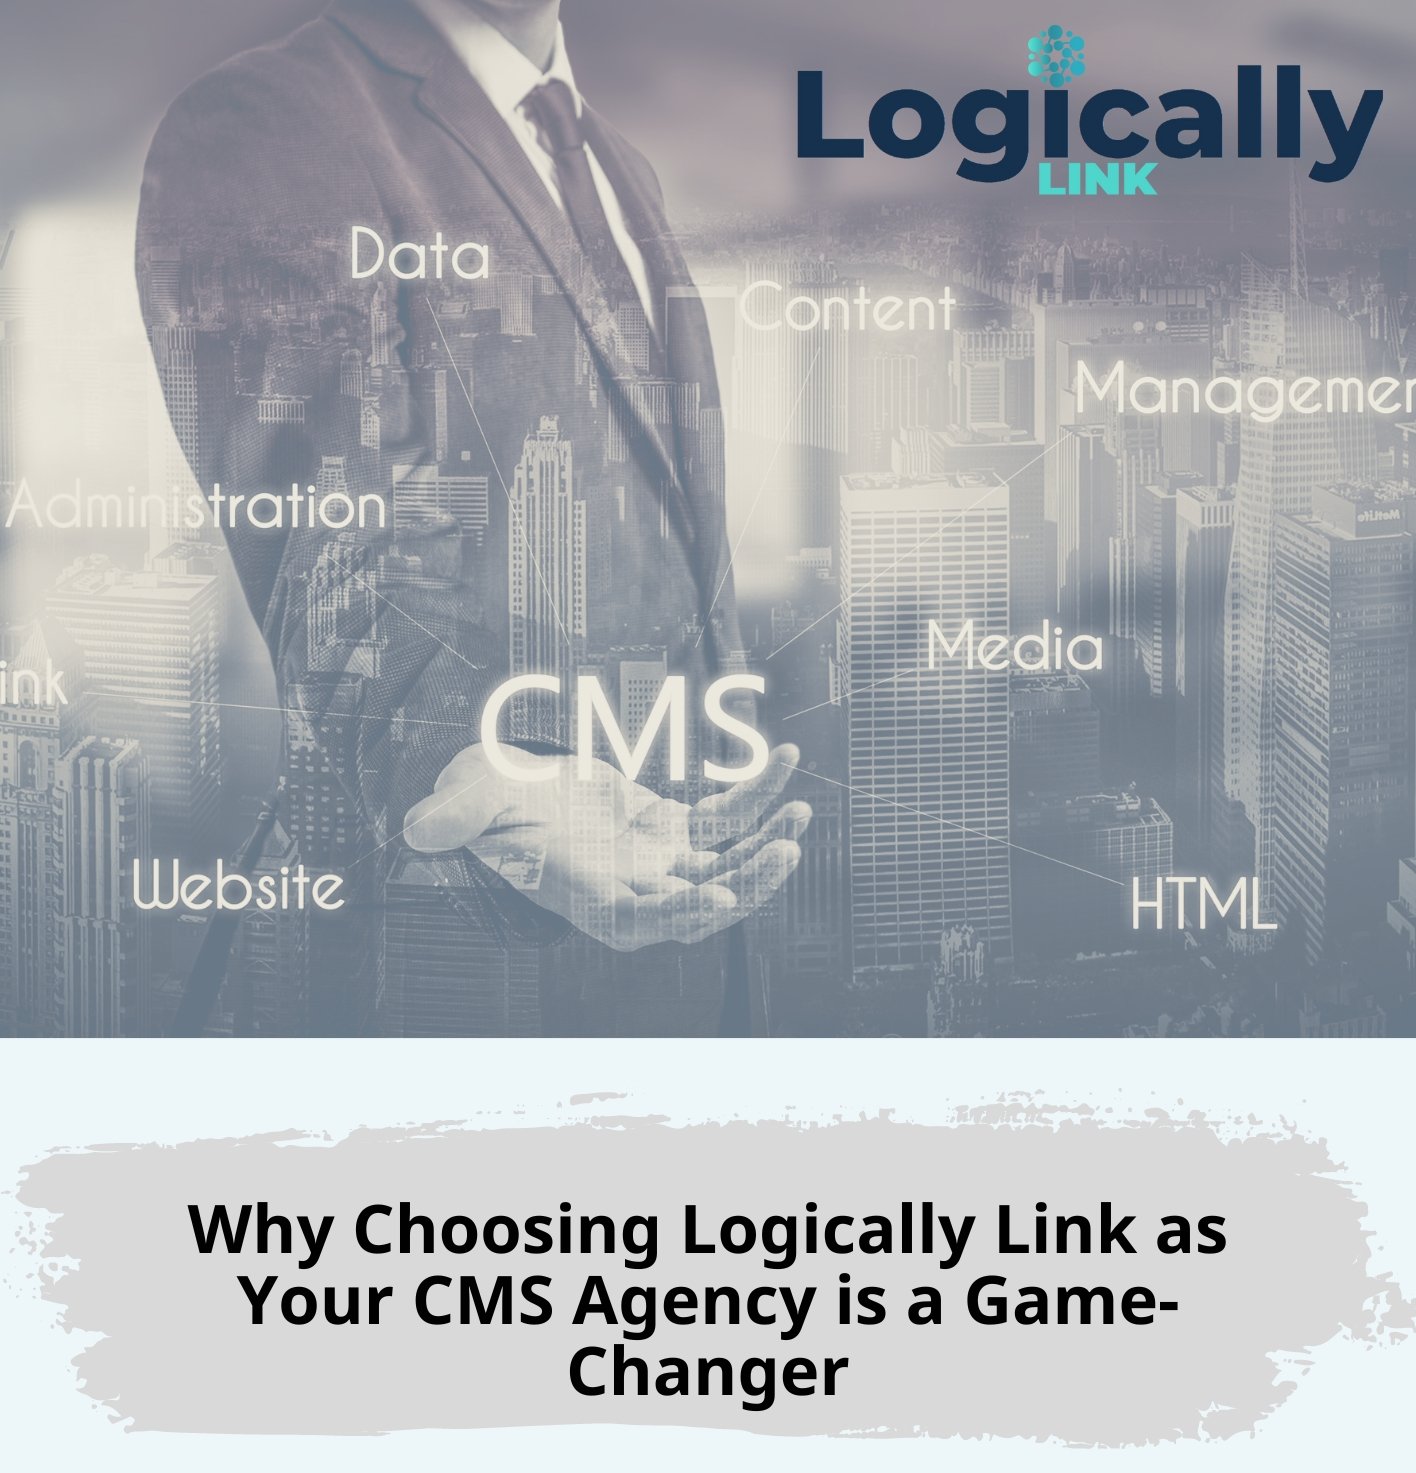 Why Choosing Logically Link as Your CMS Agency is a Game-Changer